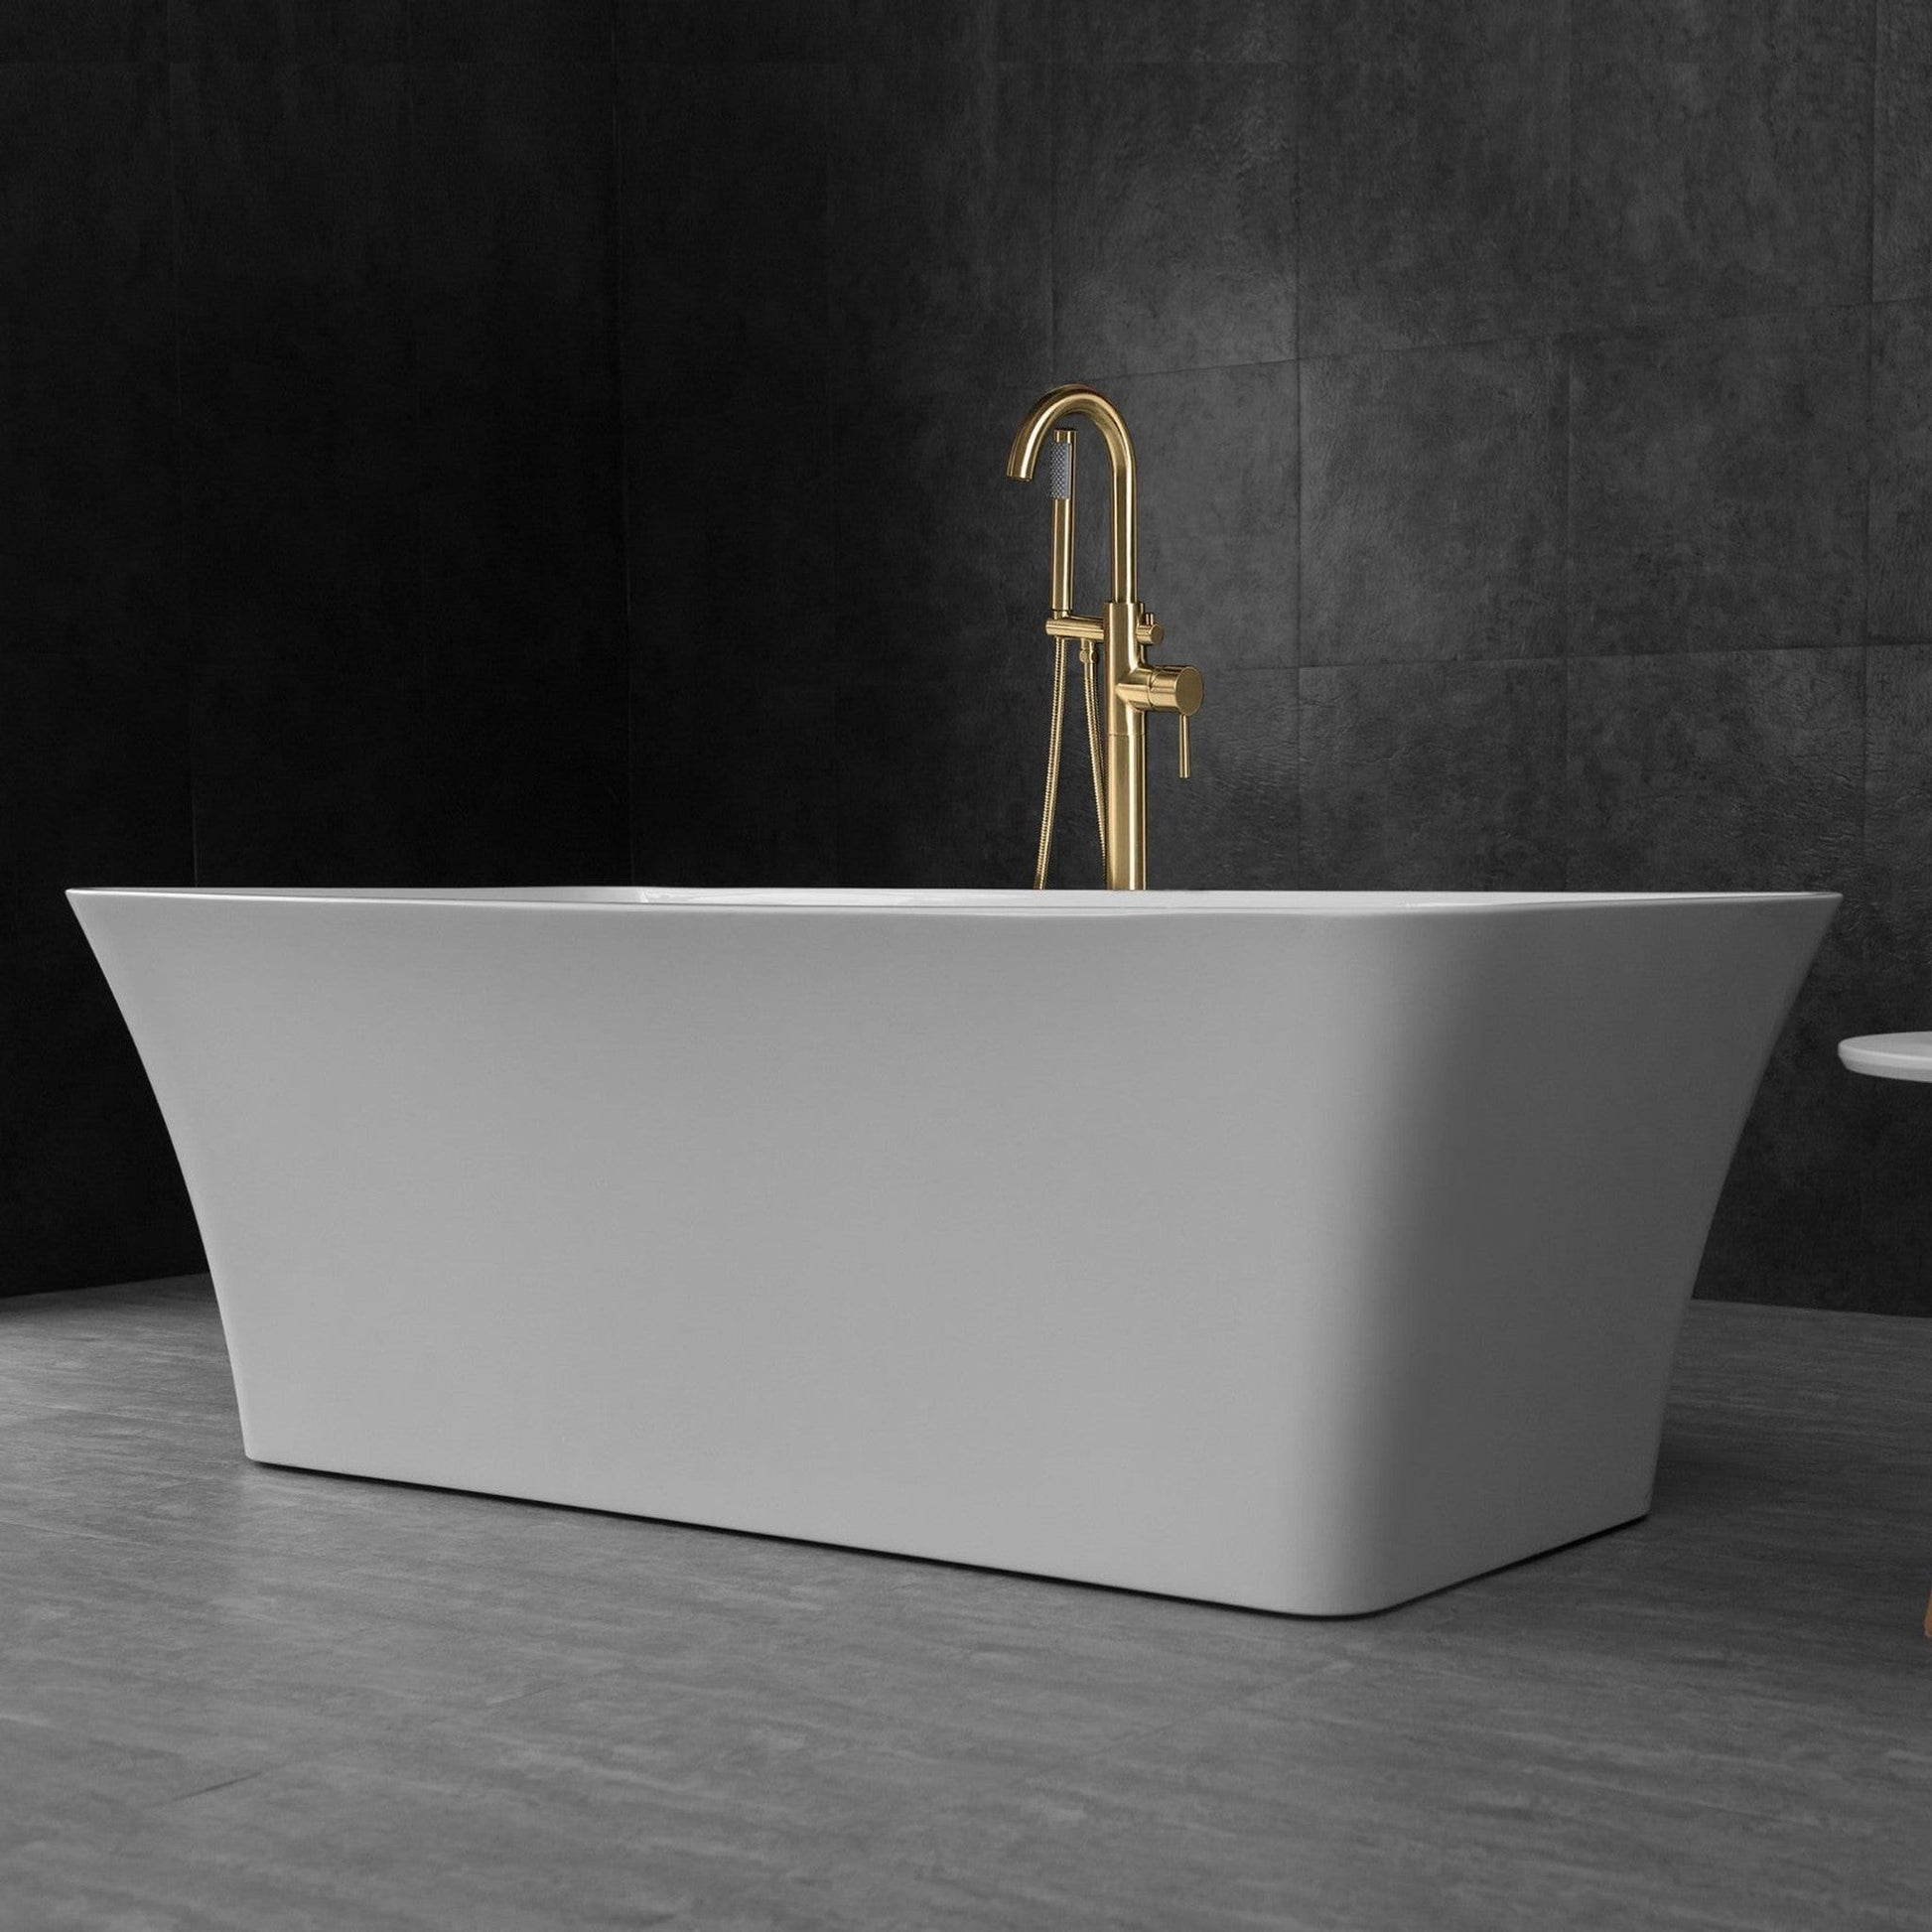 WoodBridge B0004 67" White Acrylic Freestanding Soaking Bathtub With Brushed Gold Drain, Overflow, F0073BGVT Tub Filler and Caddy Tray